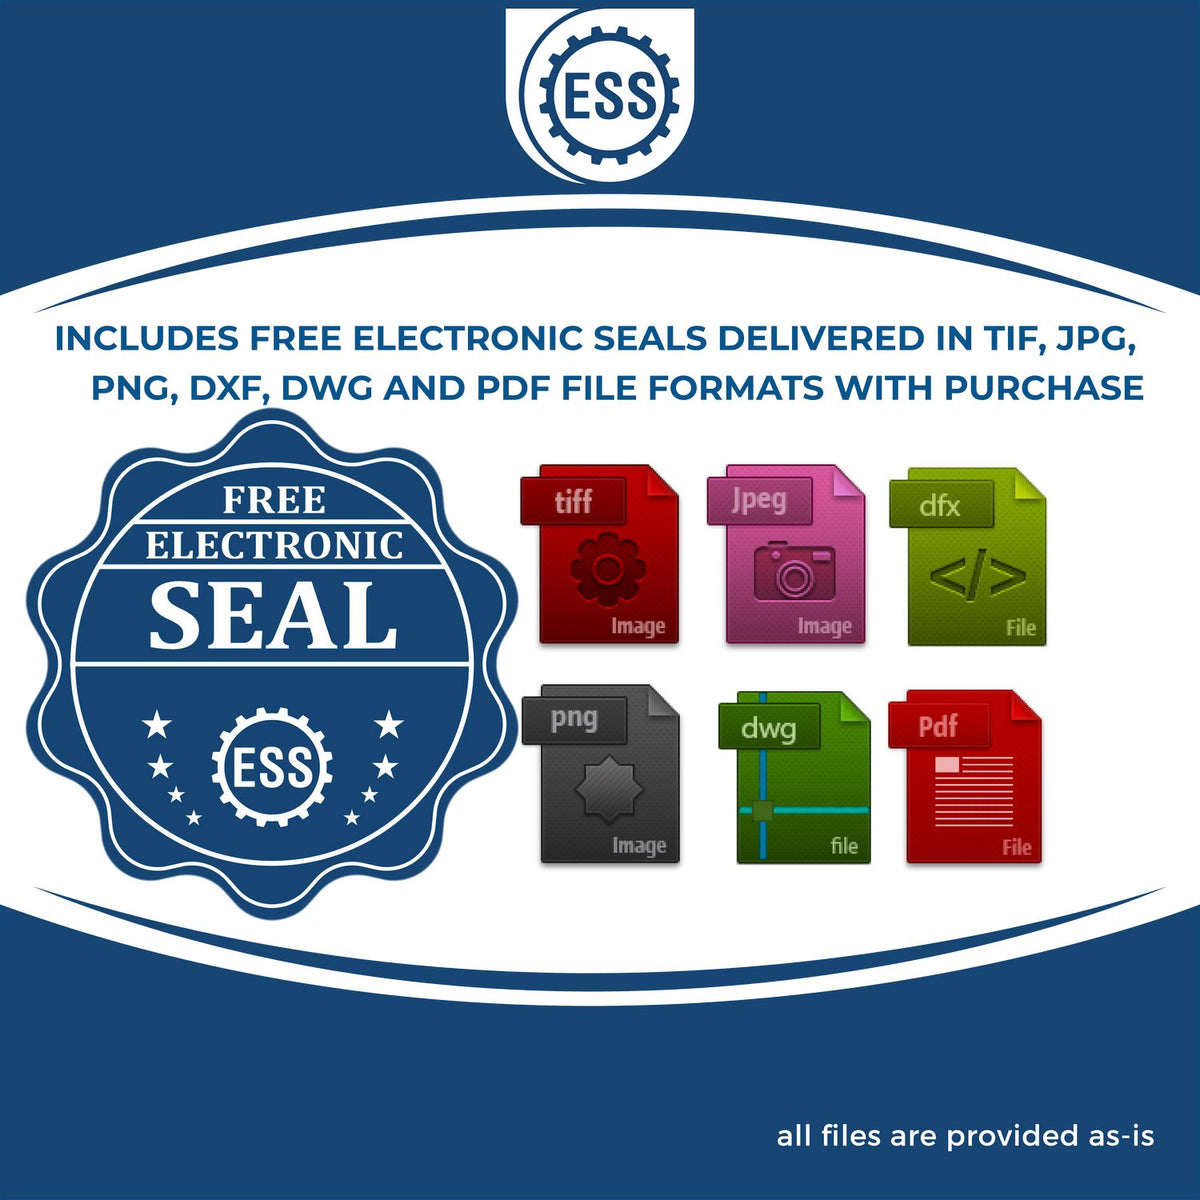 An infographic for the free electronic seal for the Gift Massachusetts Land Surveyor Seal illustrating the different file type icons such as DXF, DWG, TIF, JPG and PNG.